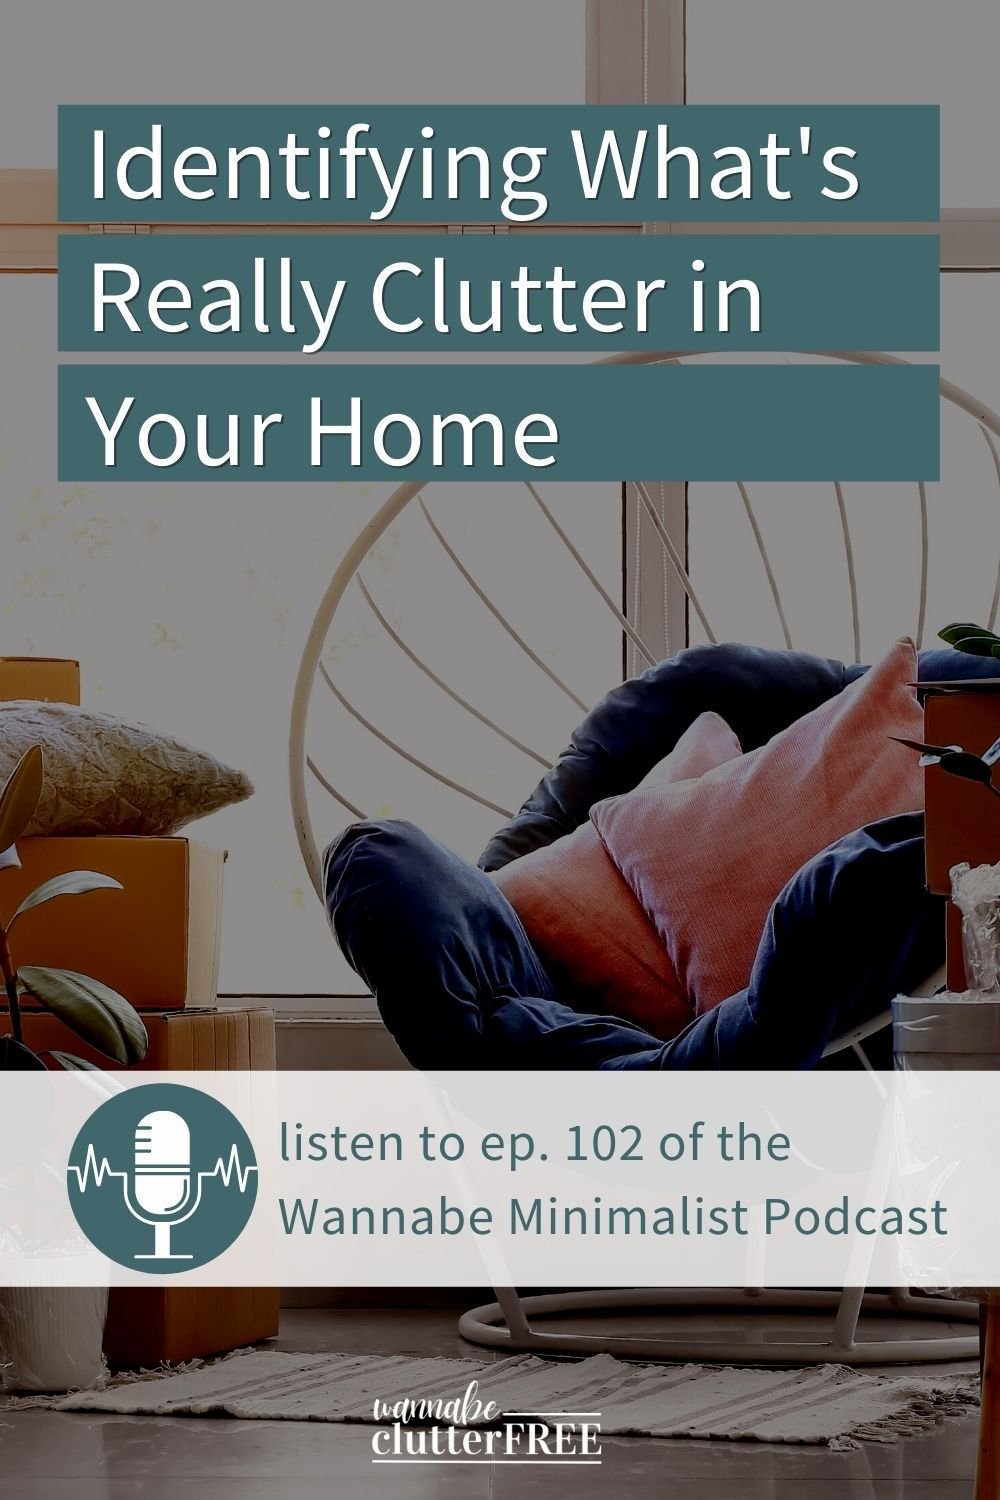 Identifying what's really clutter in your home